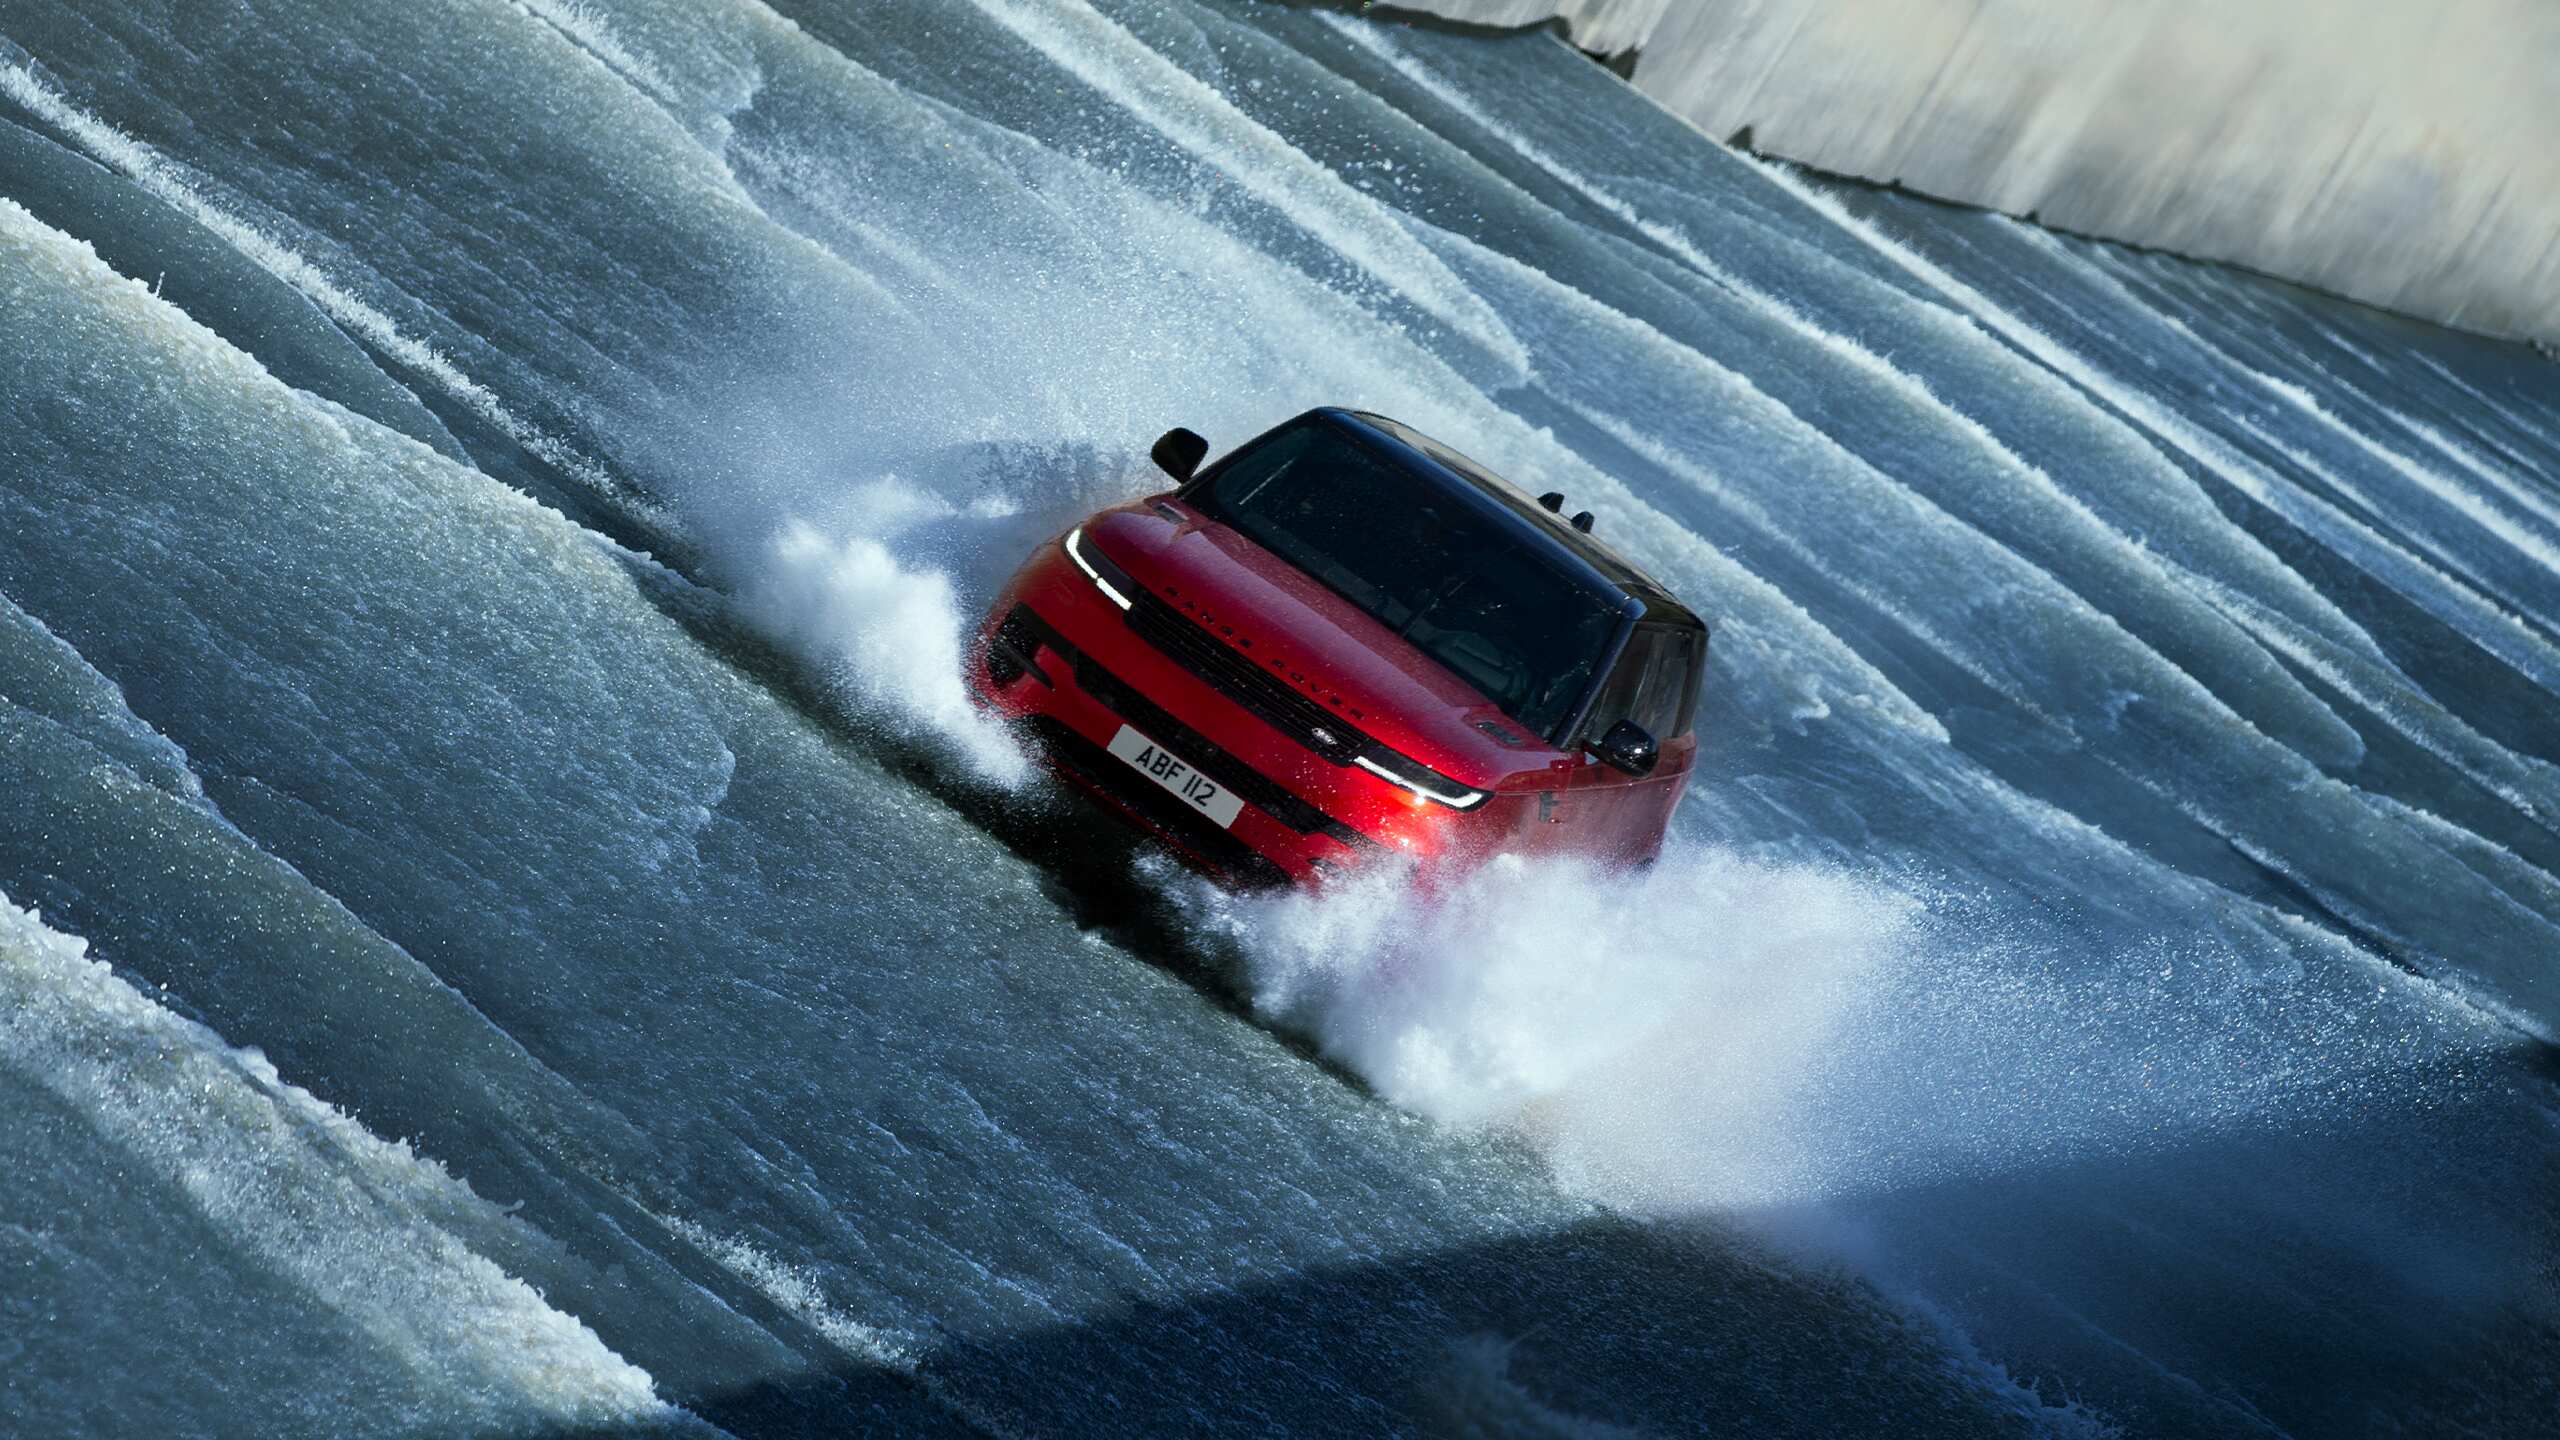 Range Rover Sport driving through water in Iceland